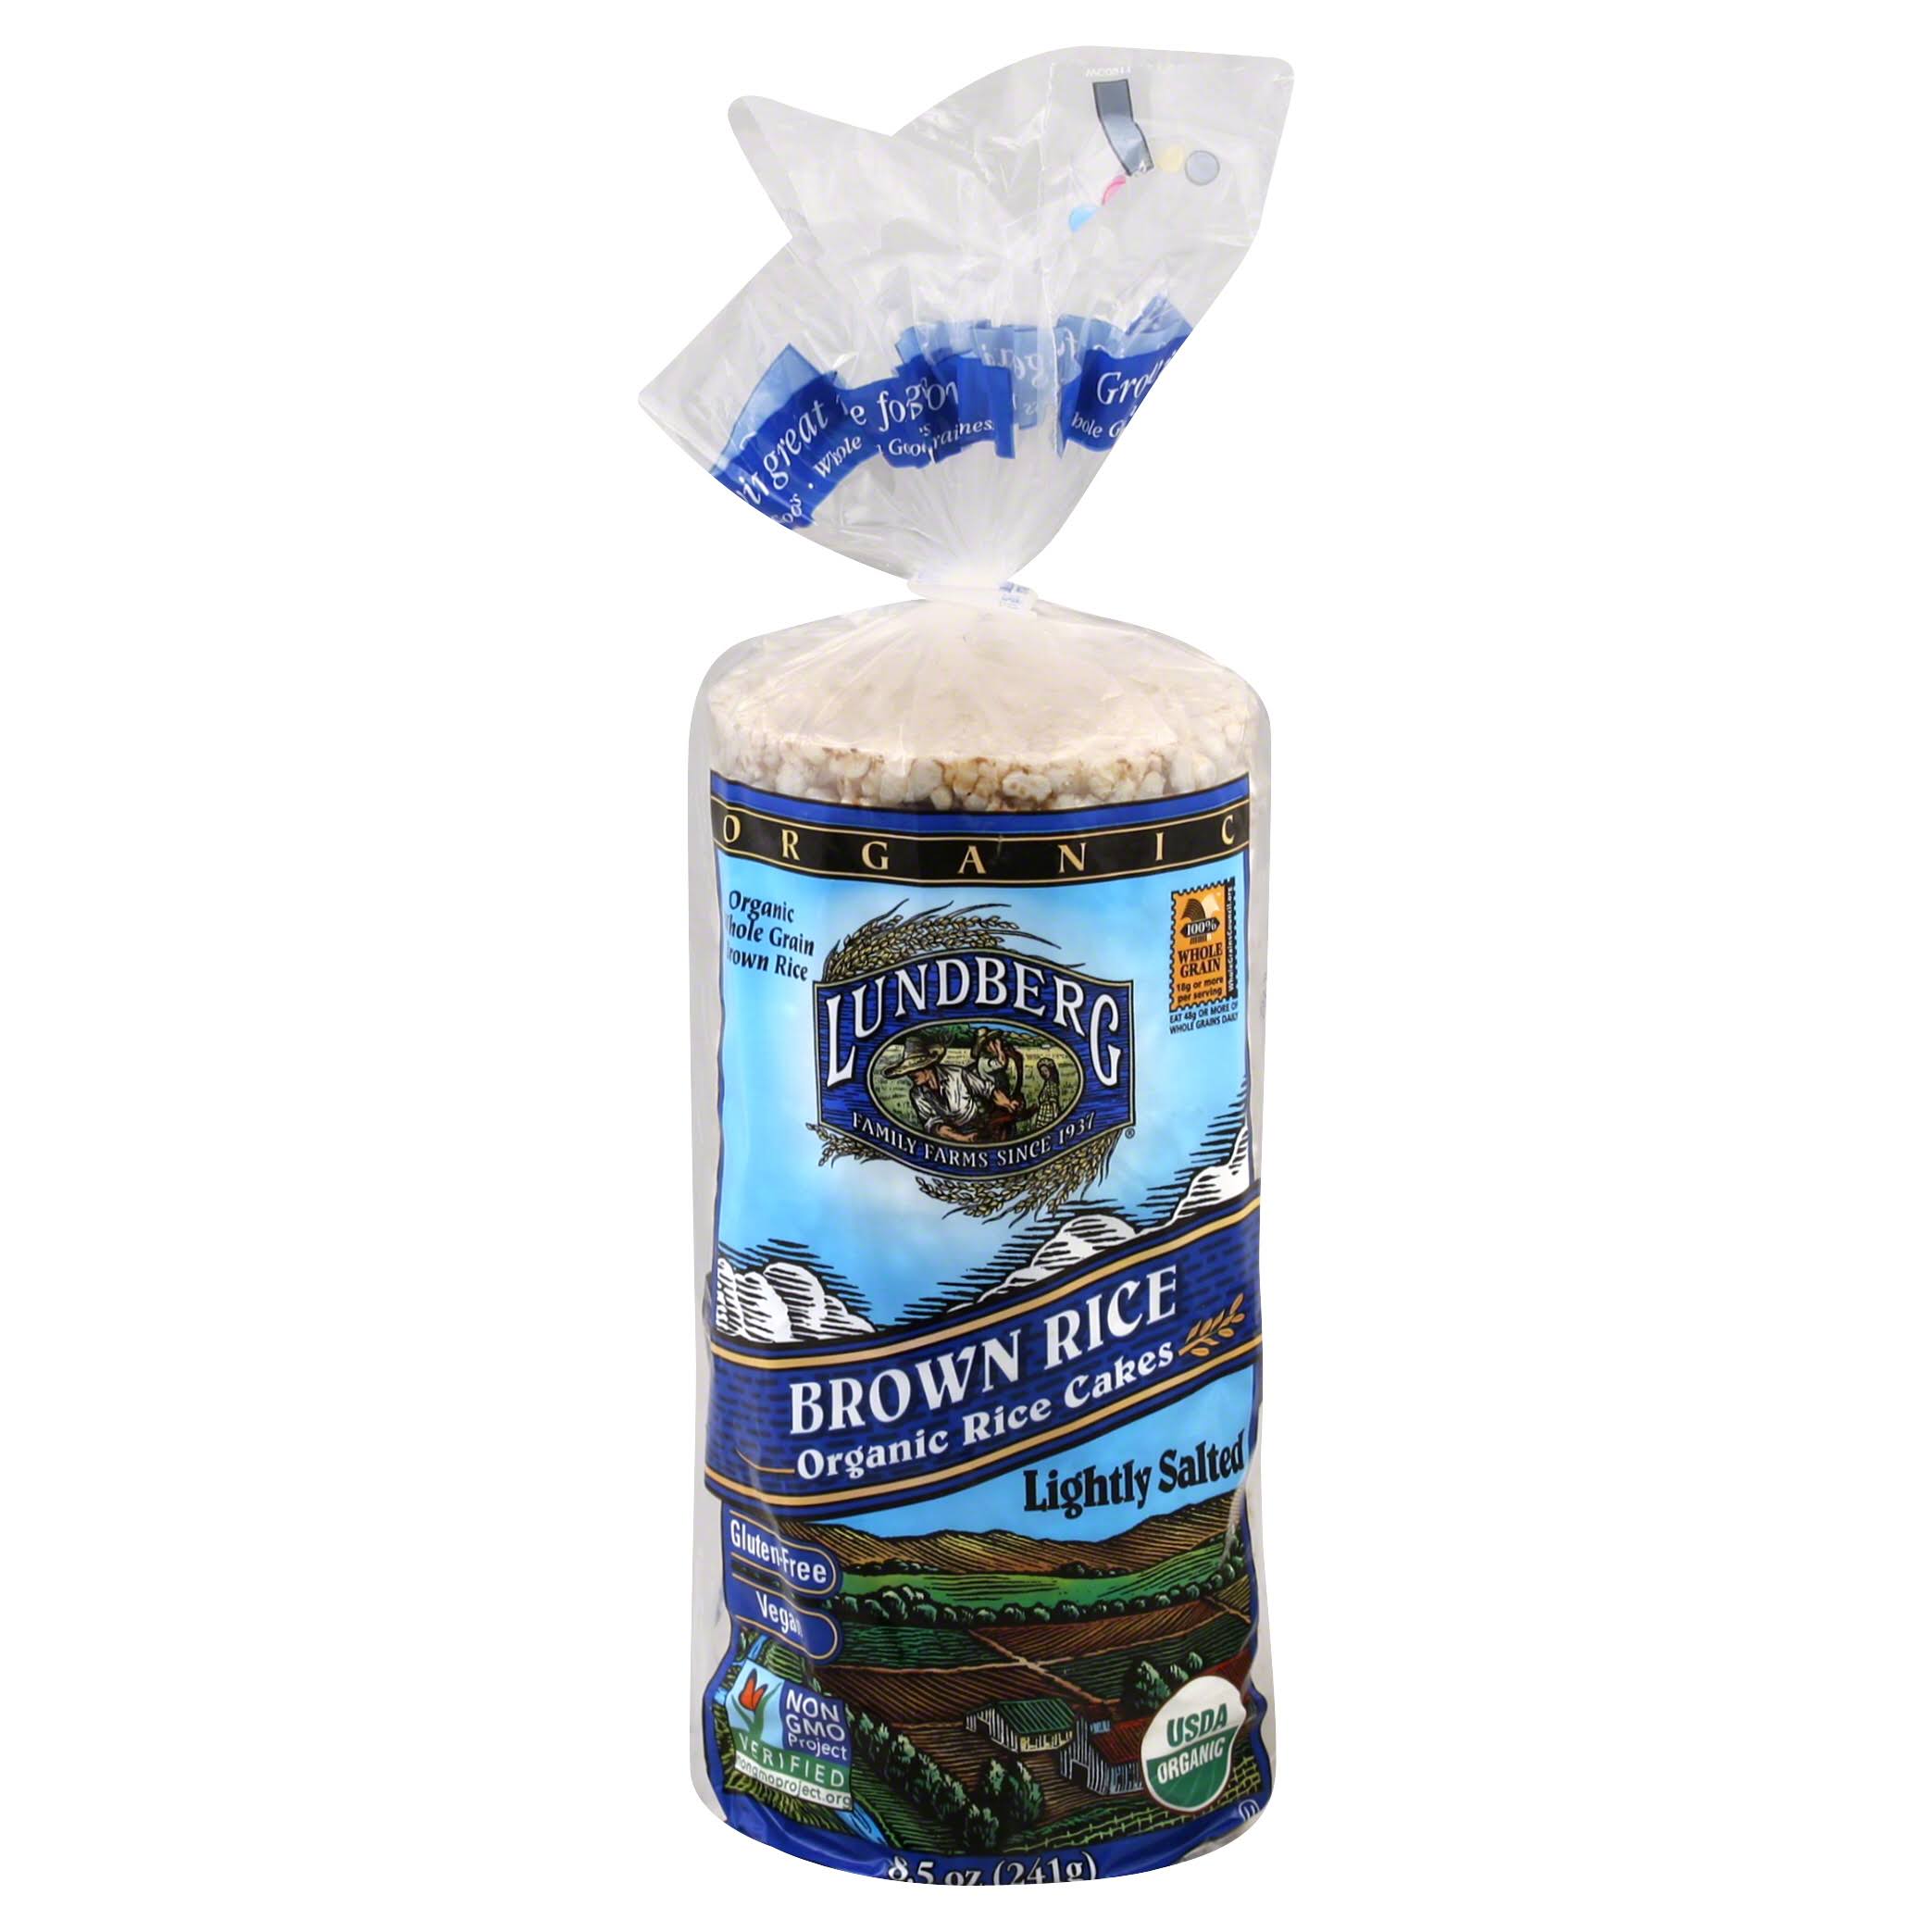 Lundberg Family Farms Rice Cakes, Organic, Whole Grain, Brown Rice, Lightly Salted - 8.5 oz